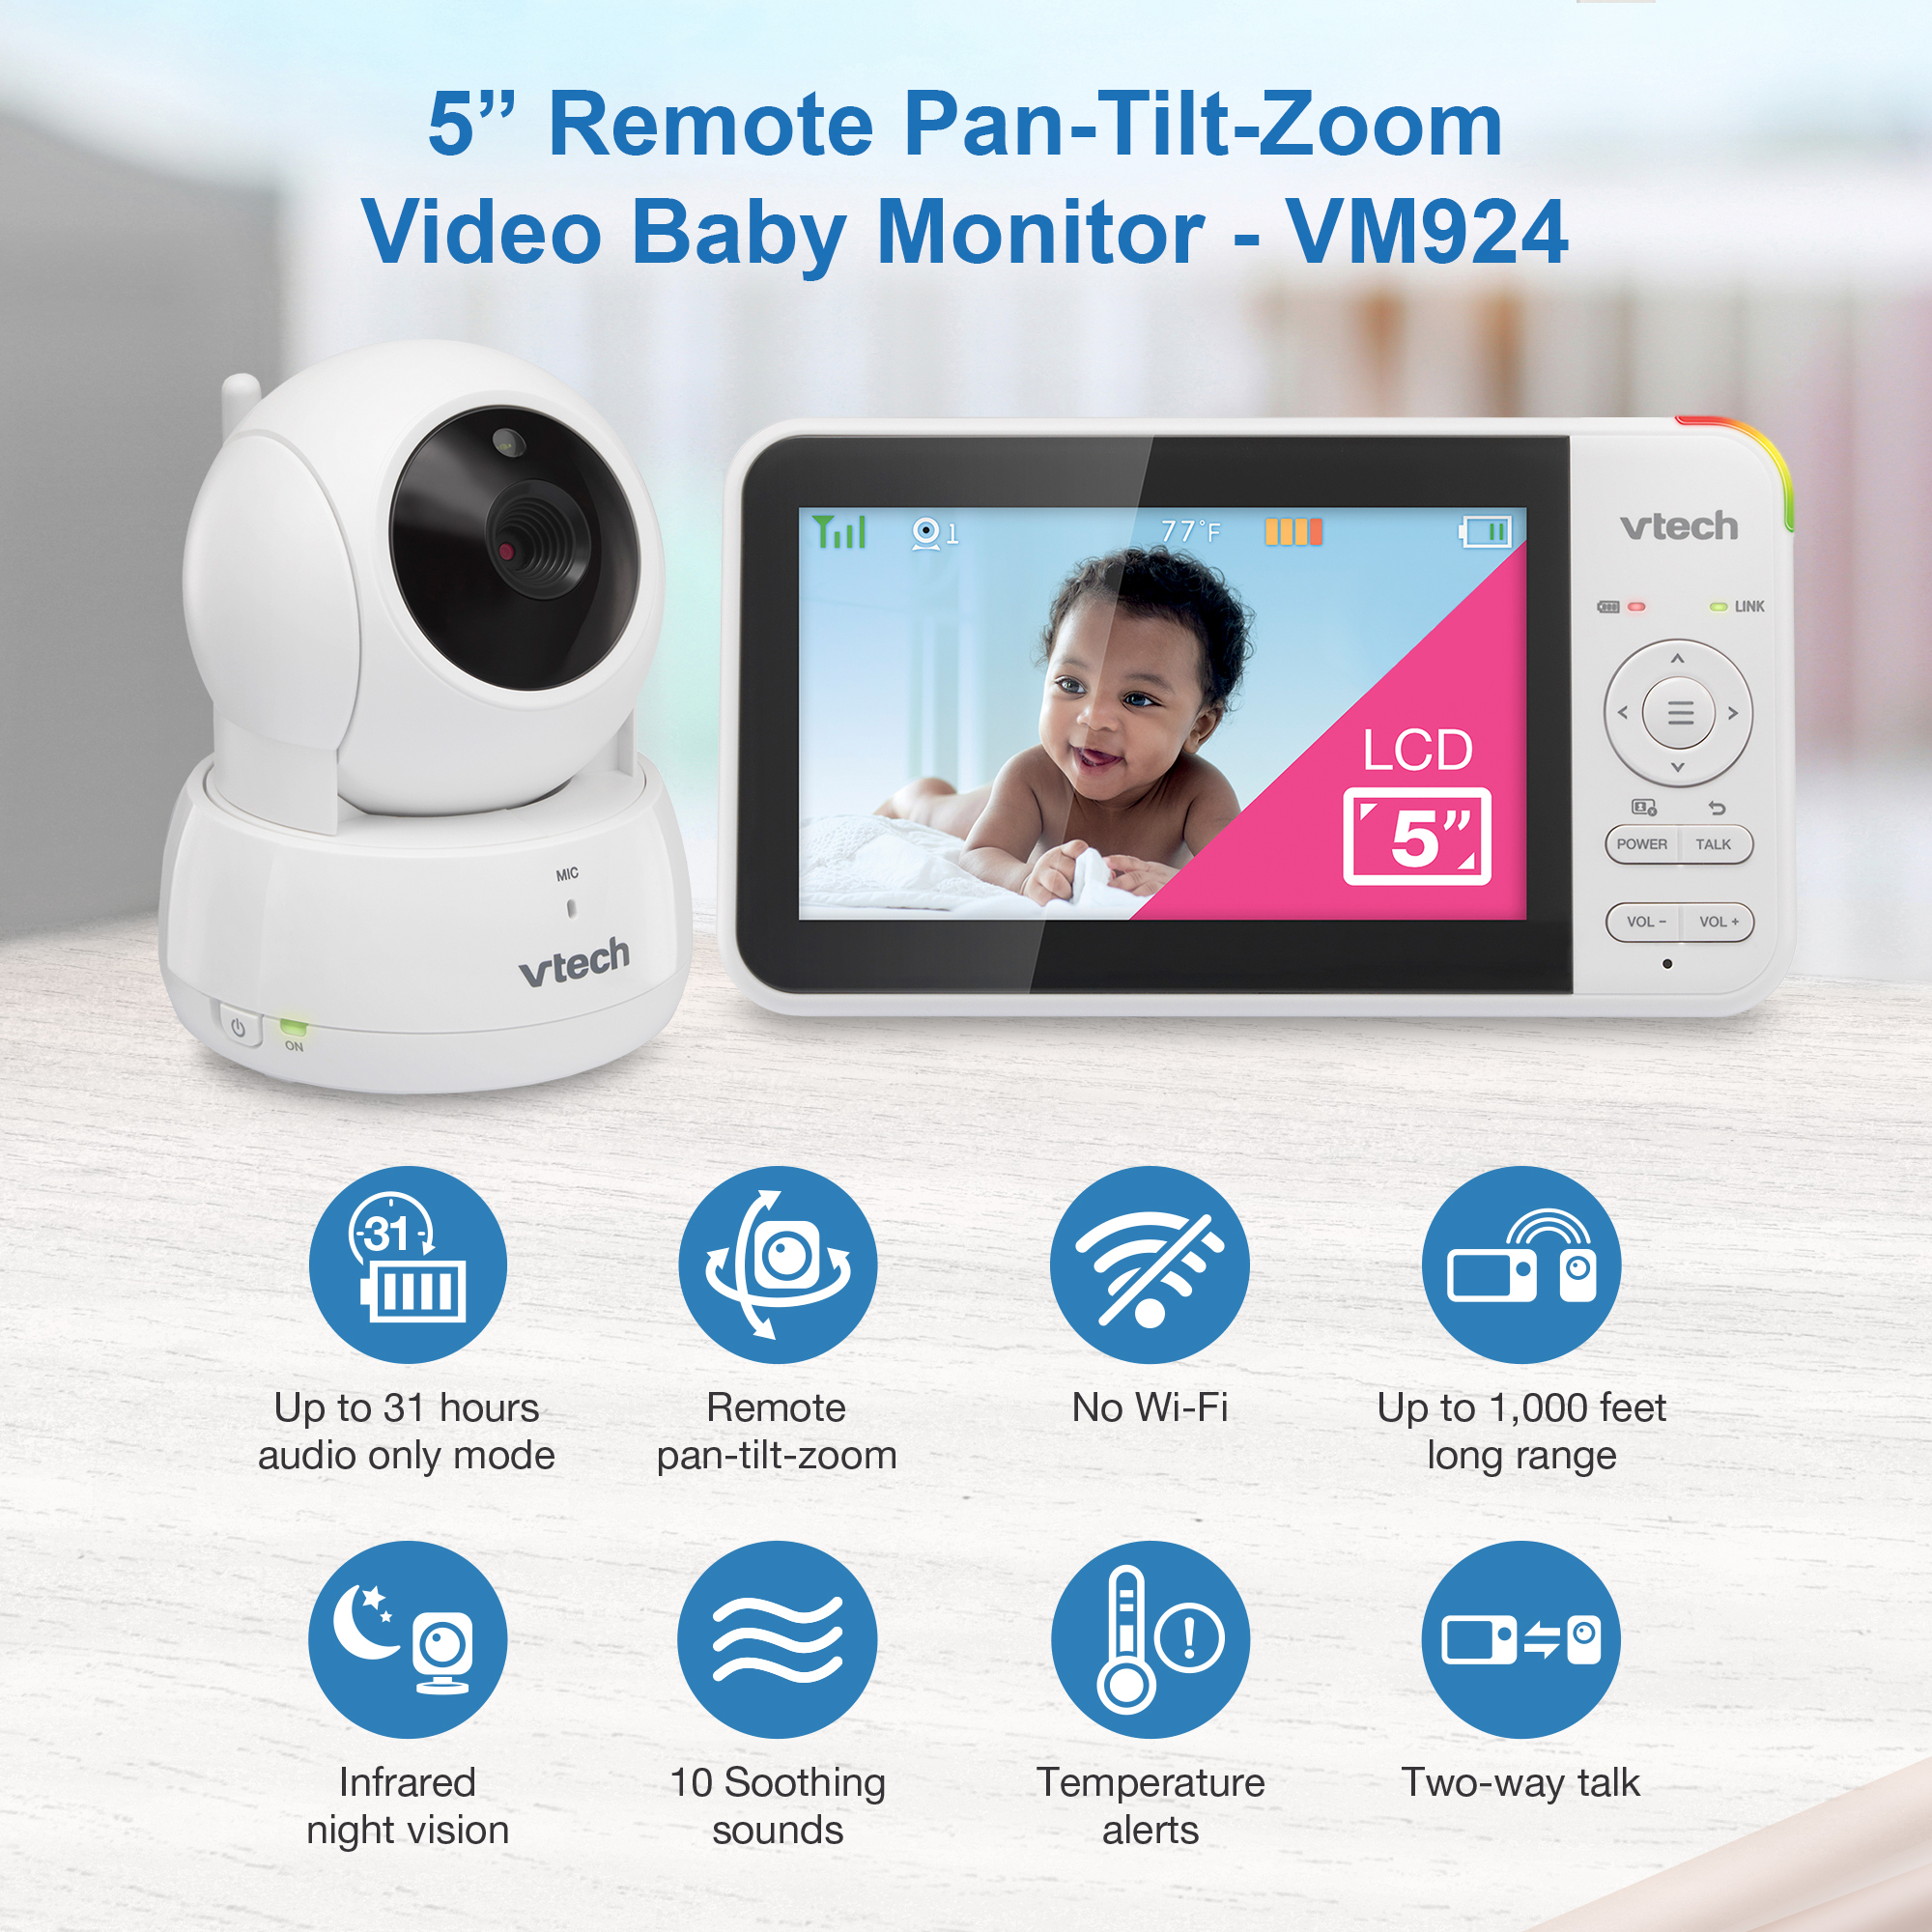 VTech Digital 7-inch Video Monitor with Remote Access Review